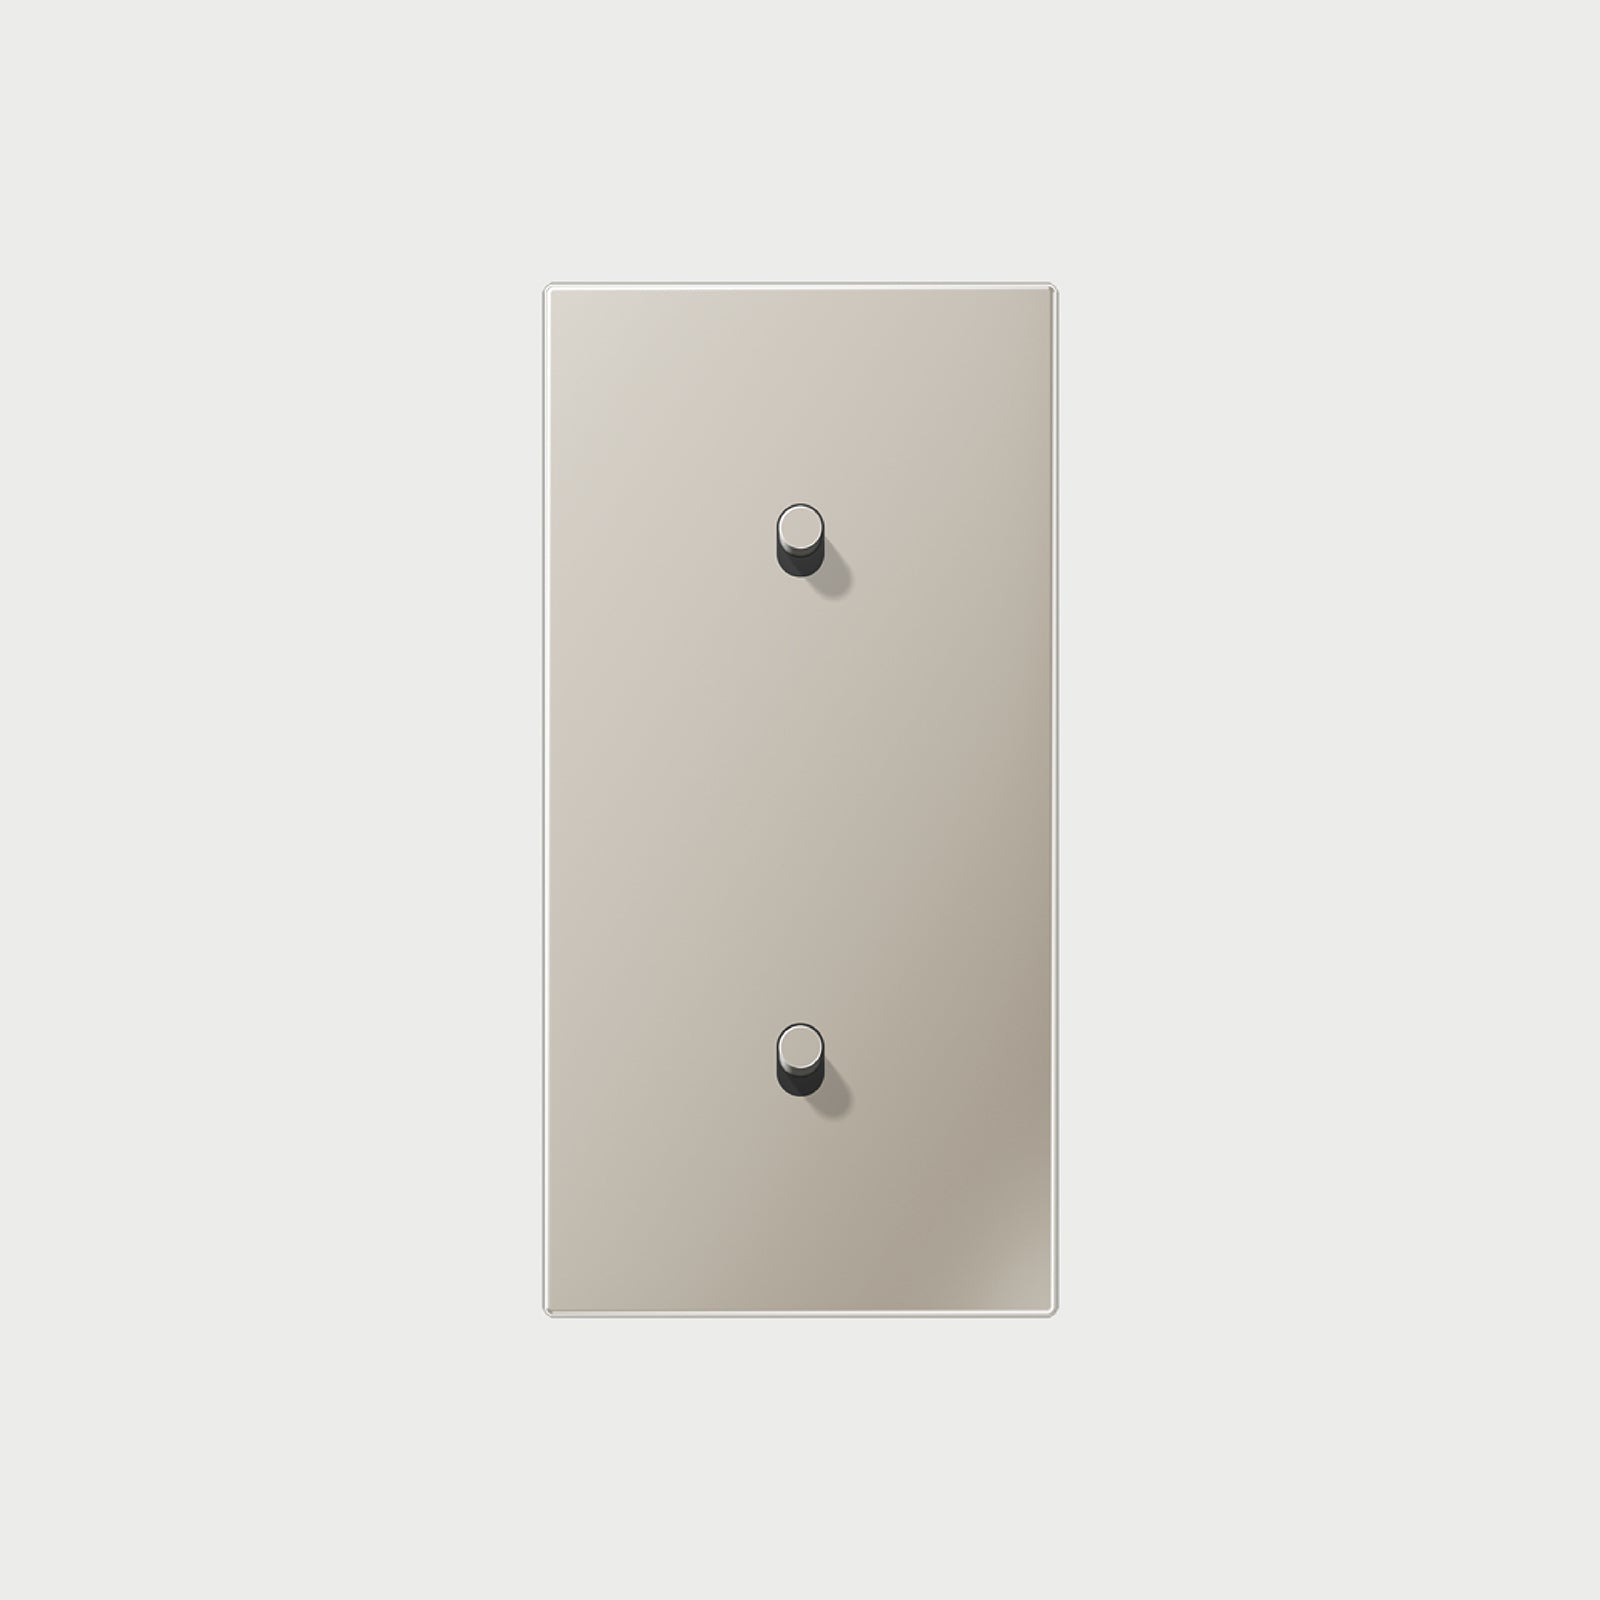 2 X 1 Toggle Vertical Stainless Steel / Way Cover